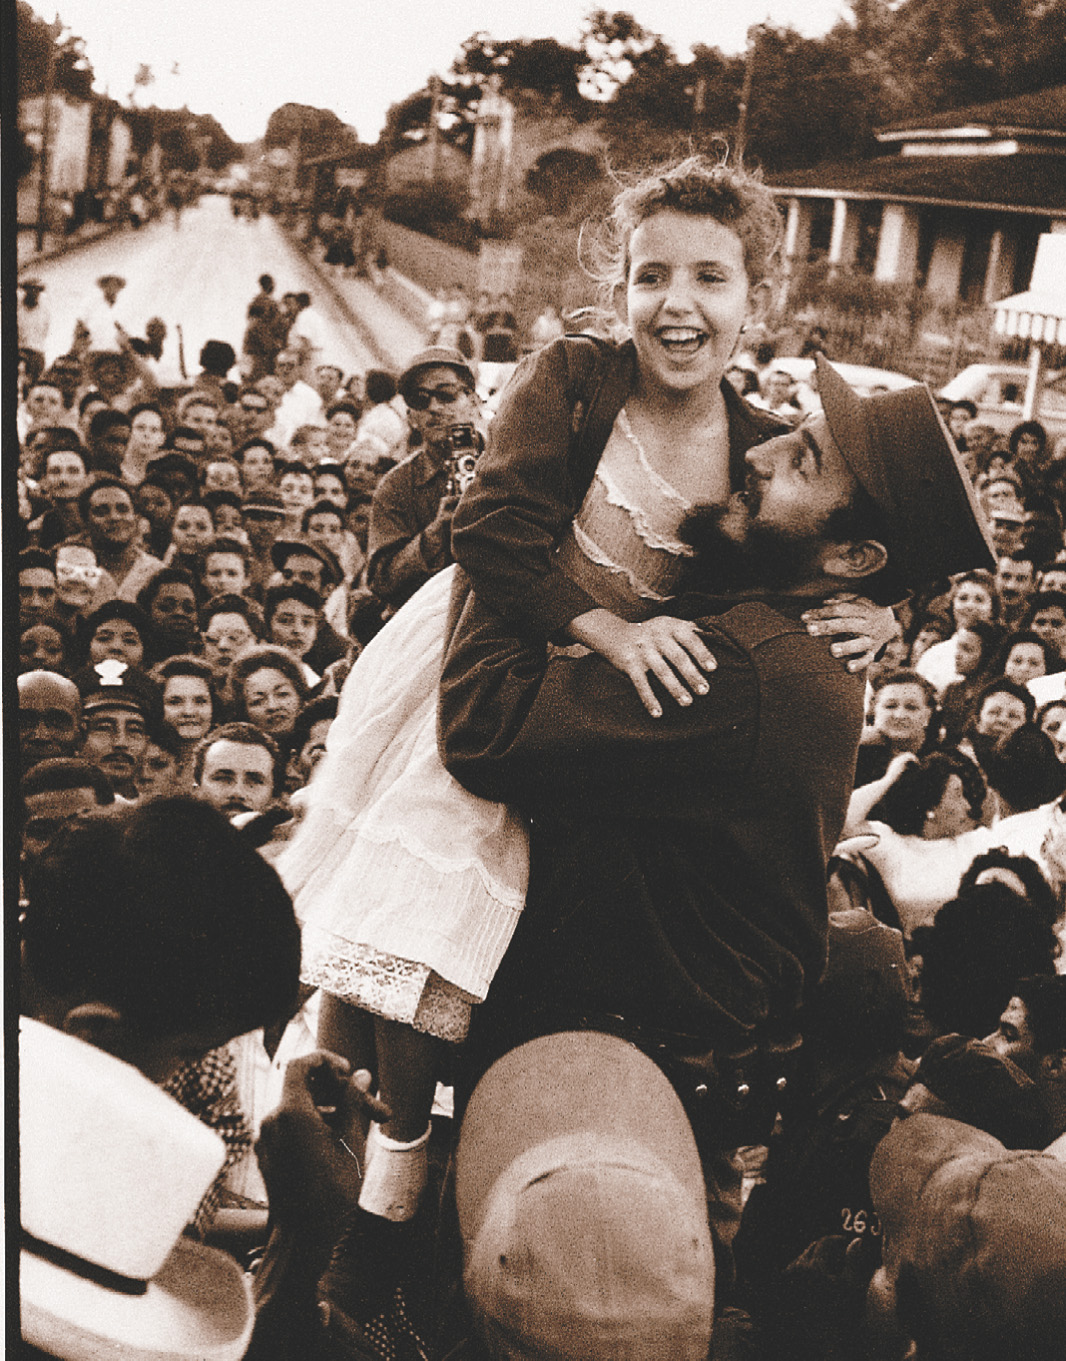 Photo: Fidel Castro holds a
smiling girl while a crowd looks on.